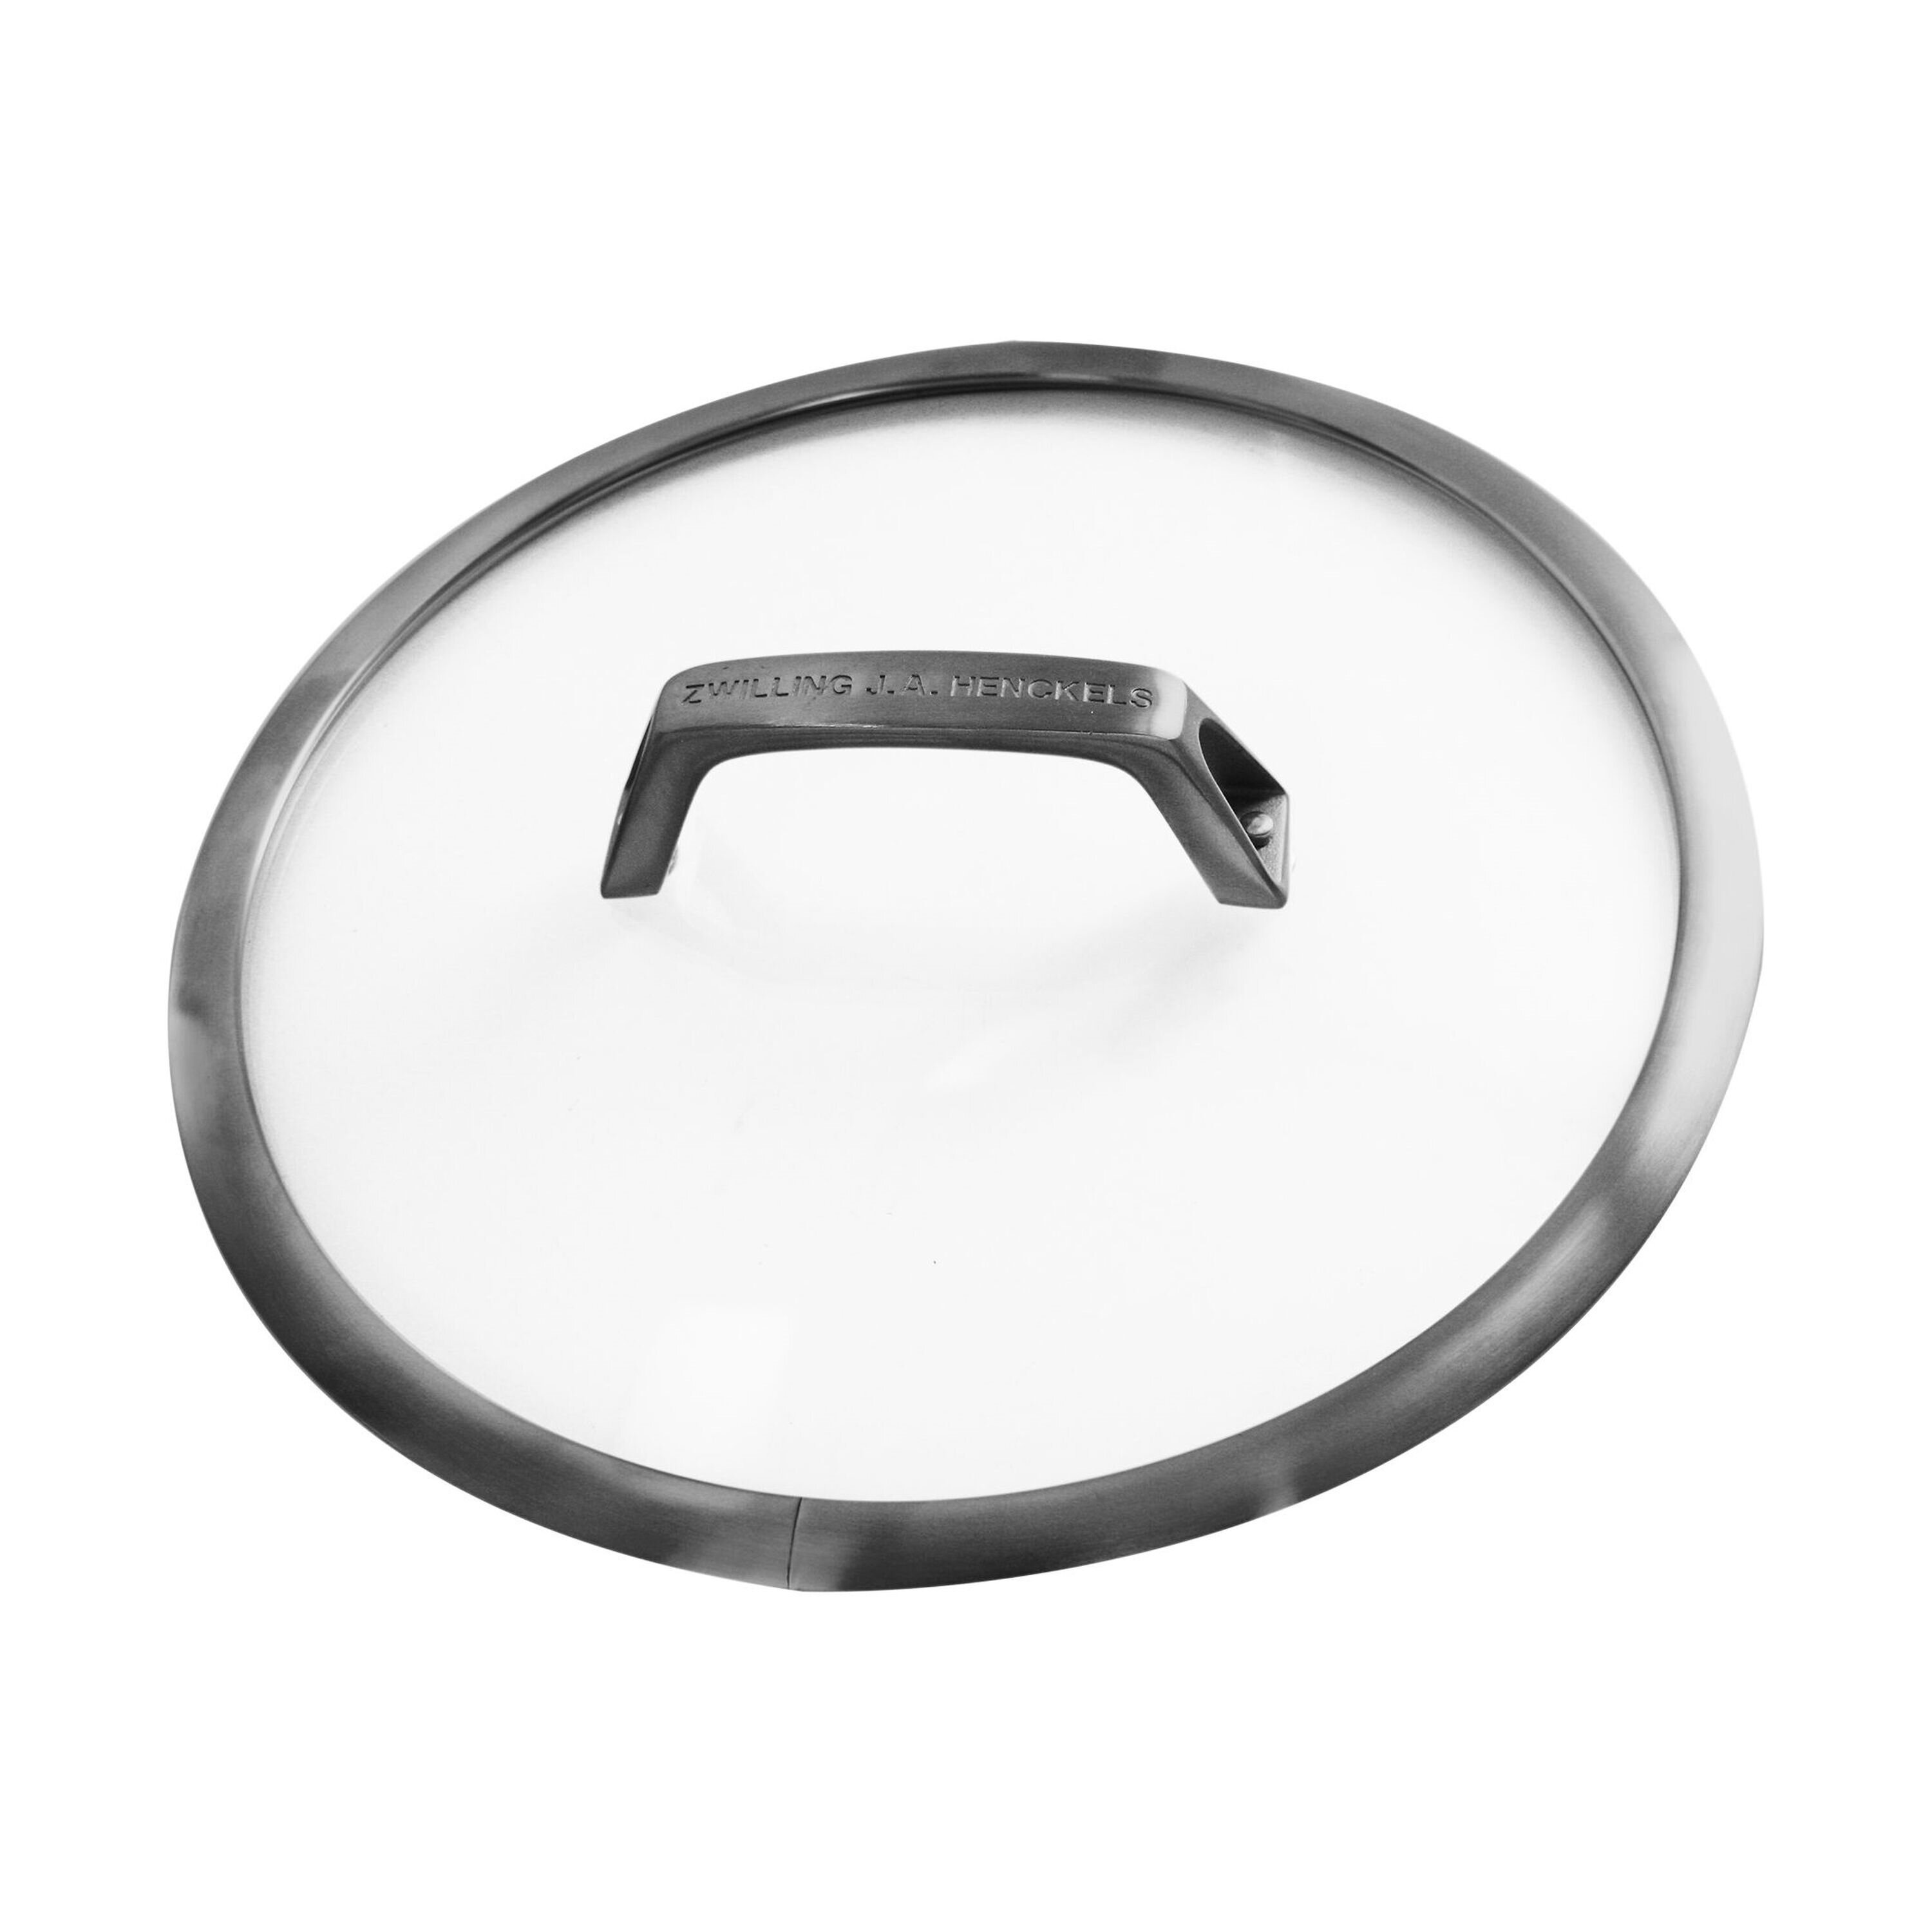 Zwilling Universal Pan Lid, Stainless Steel, Fits Pans 6 to 12